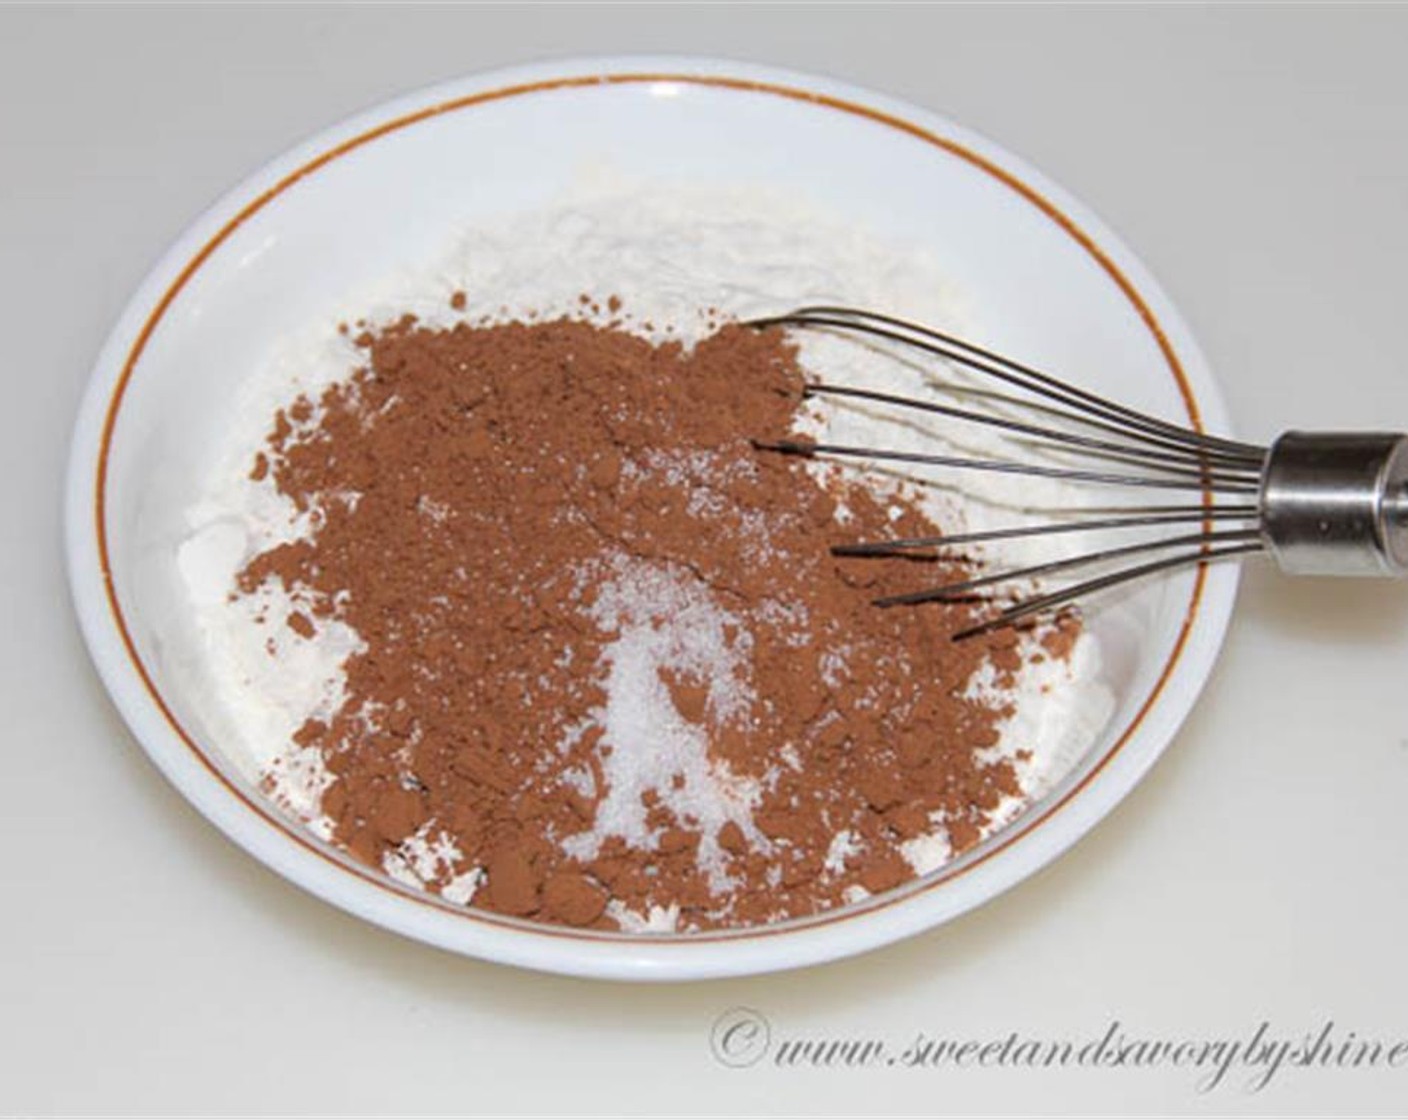 step 2 Mix All-Purpose Flour (1 1/2 cups), Unsweetened Cocoa Powder (1 Tbsp), Salt (1/4 tsp) and Granulated Sugar (1 cup) together.